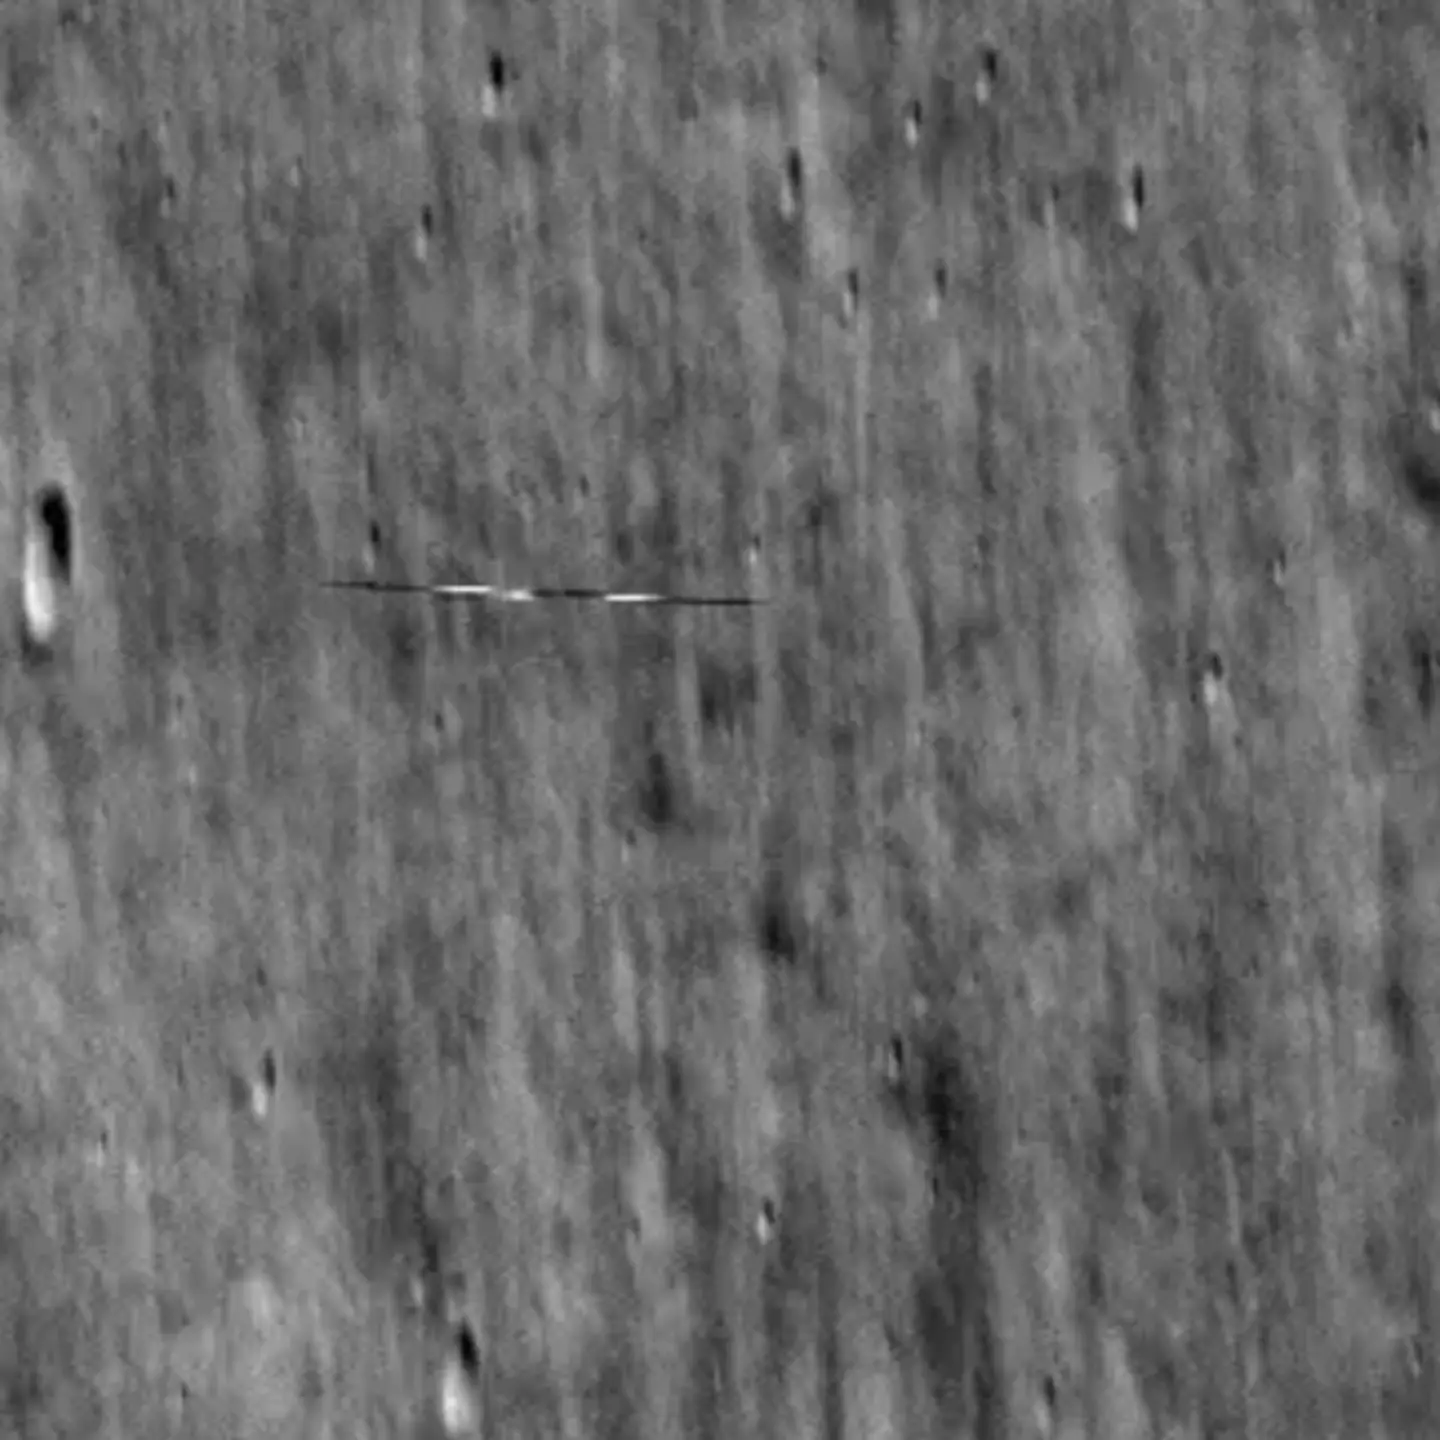 Mysterious bullet-shaped object spotted orbiting the moon in NASA pic